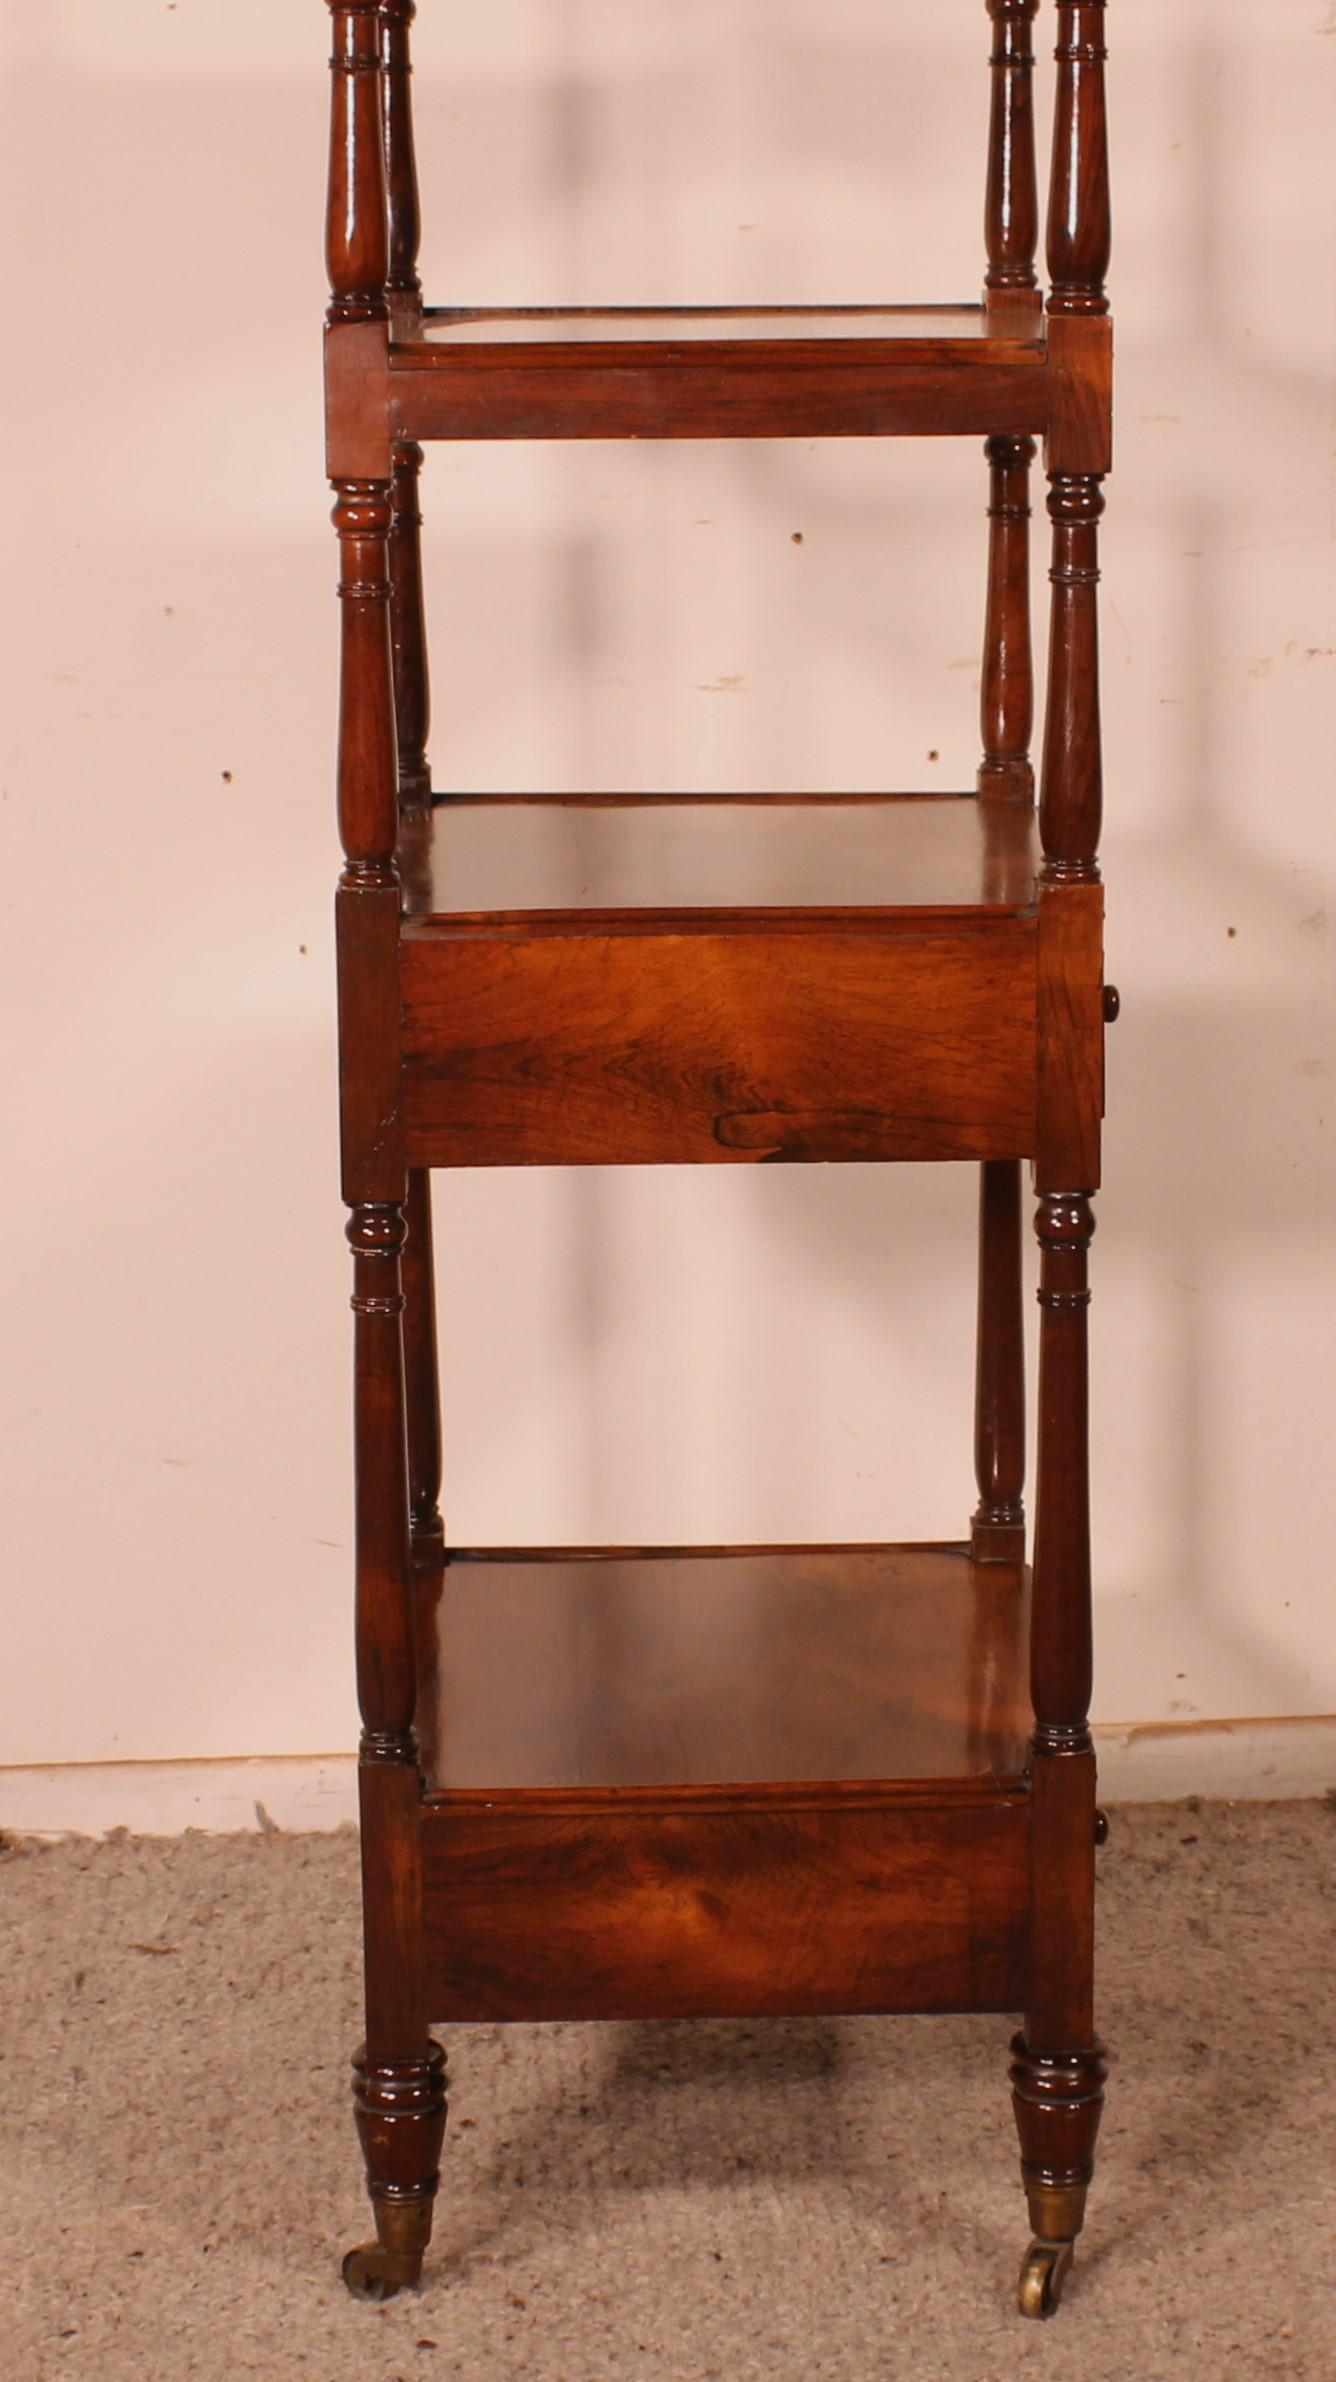 Rosewood Whatnot Or Shelf From 19th Century - England 1